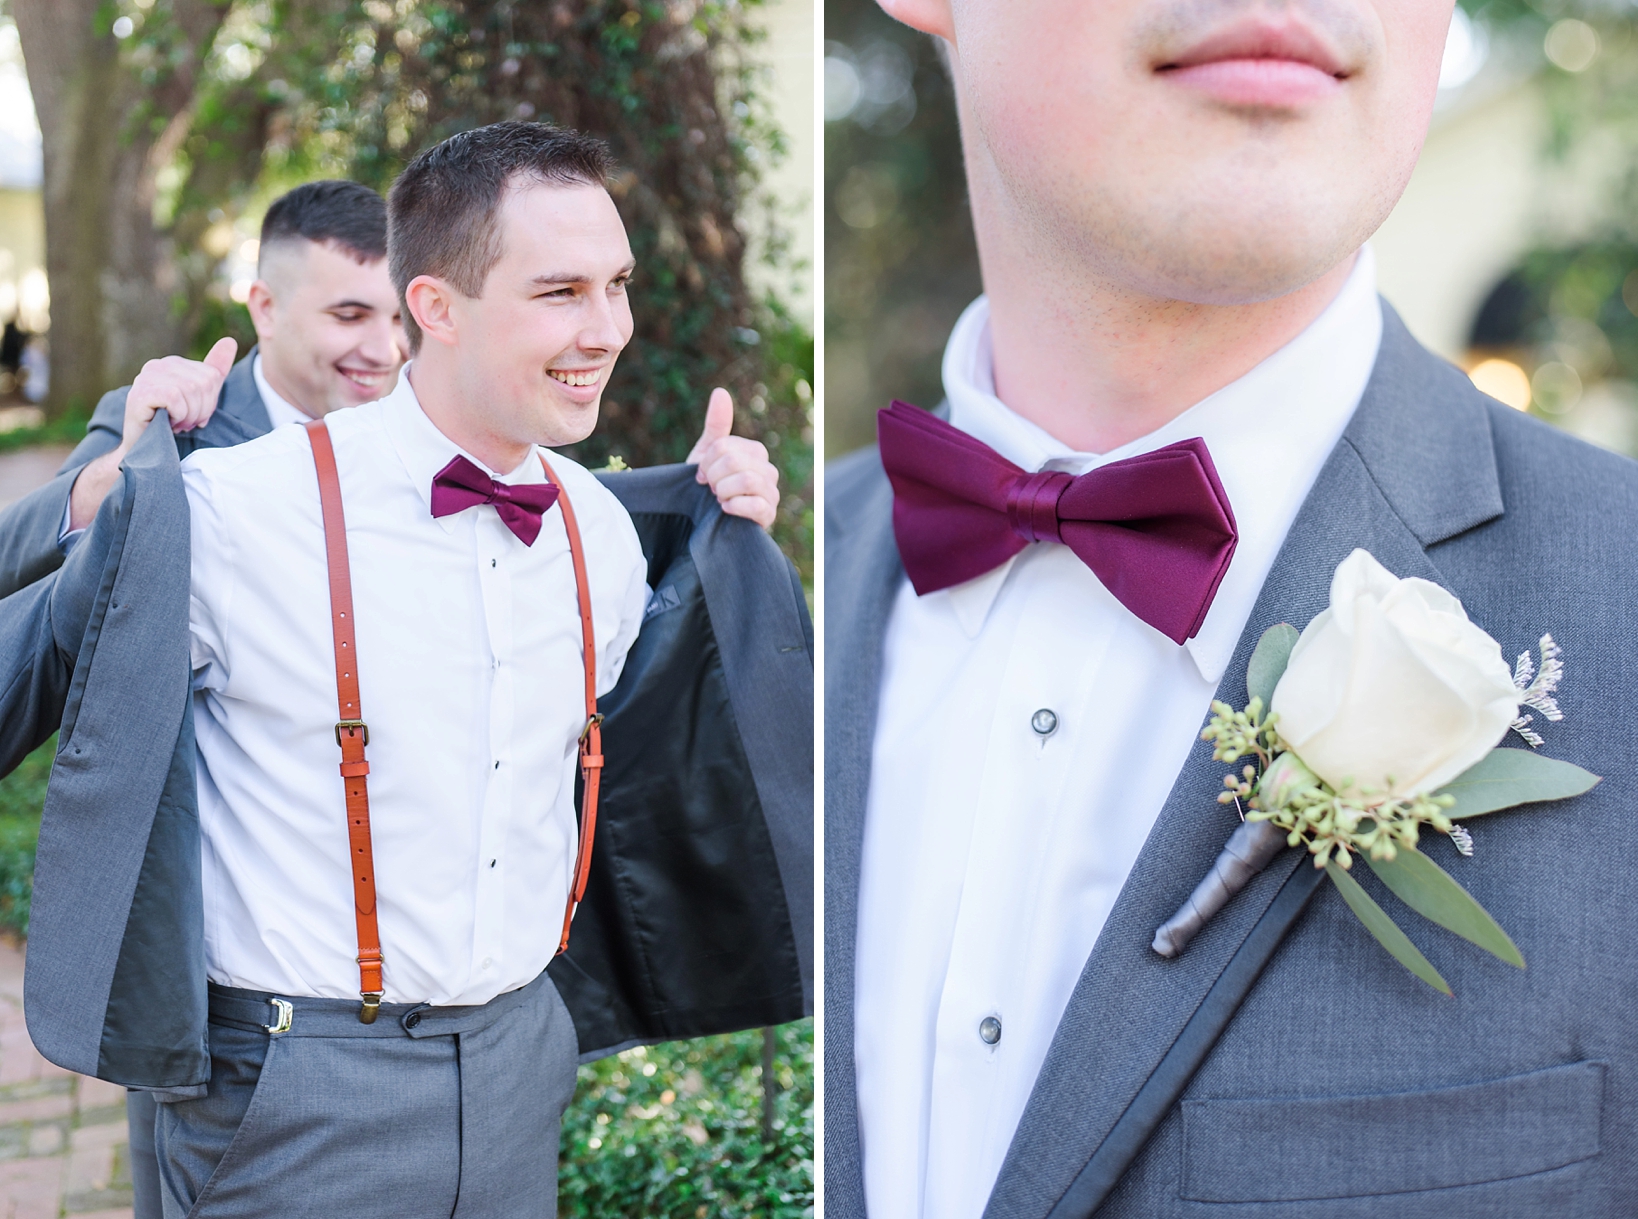 Groom and his Best Man helping him put his suit jacket on. Custom leather suspenders